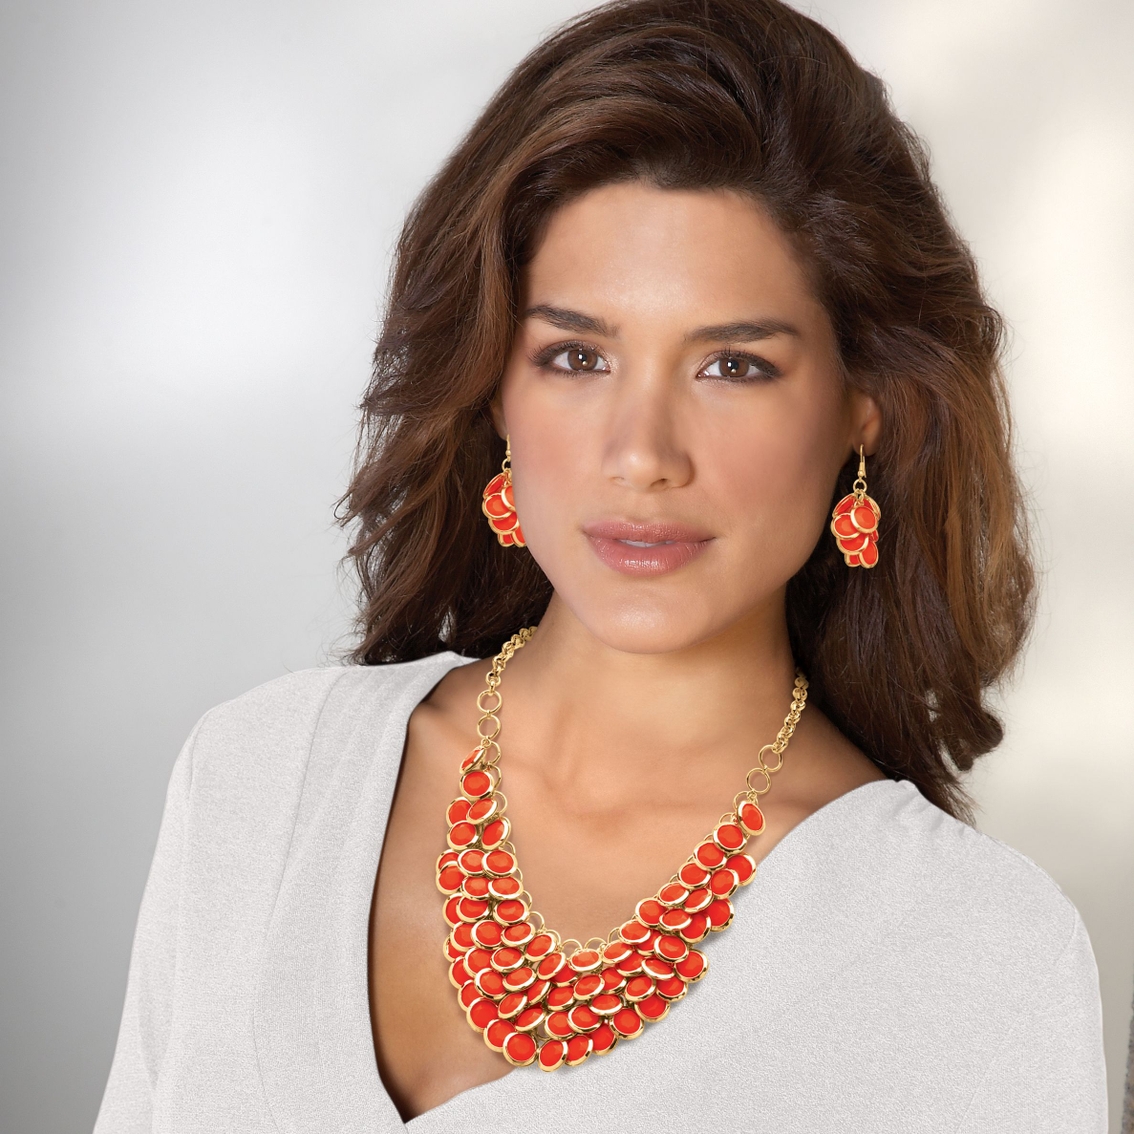 2 Piece Orange Bib Necklace and Cluster Earrings Set in Yellow Goldtone - Image 3 of 5